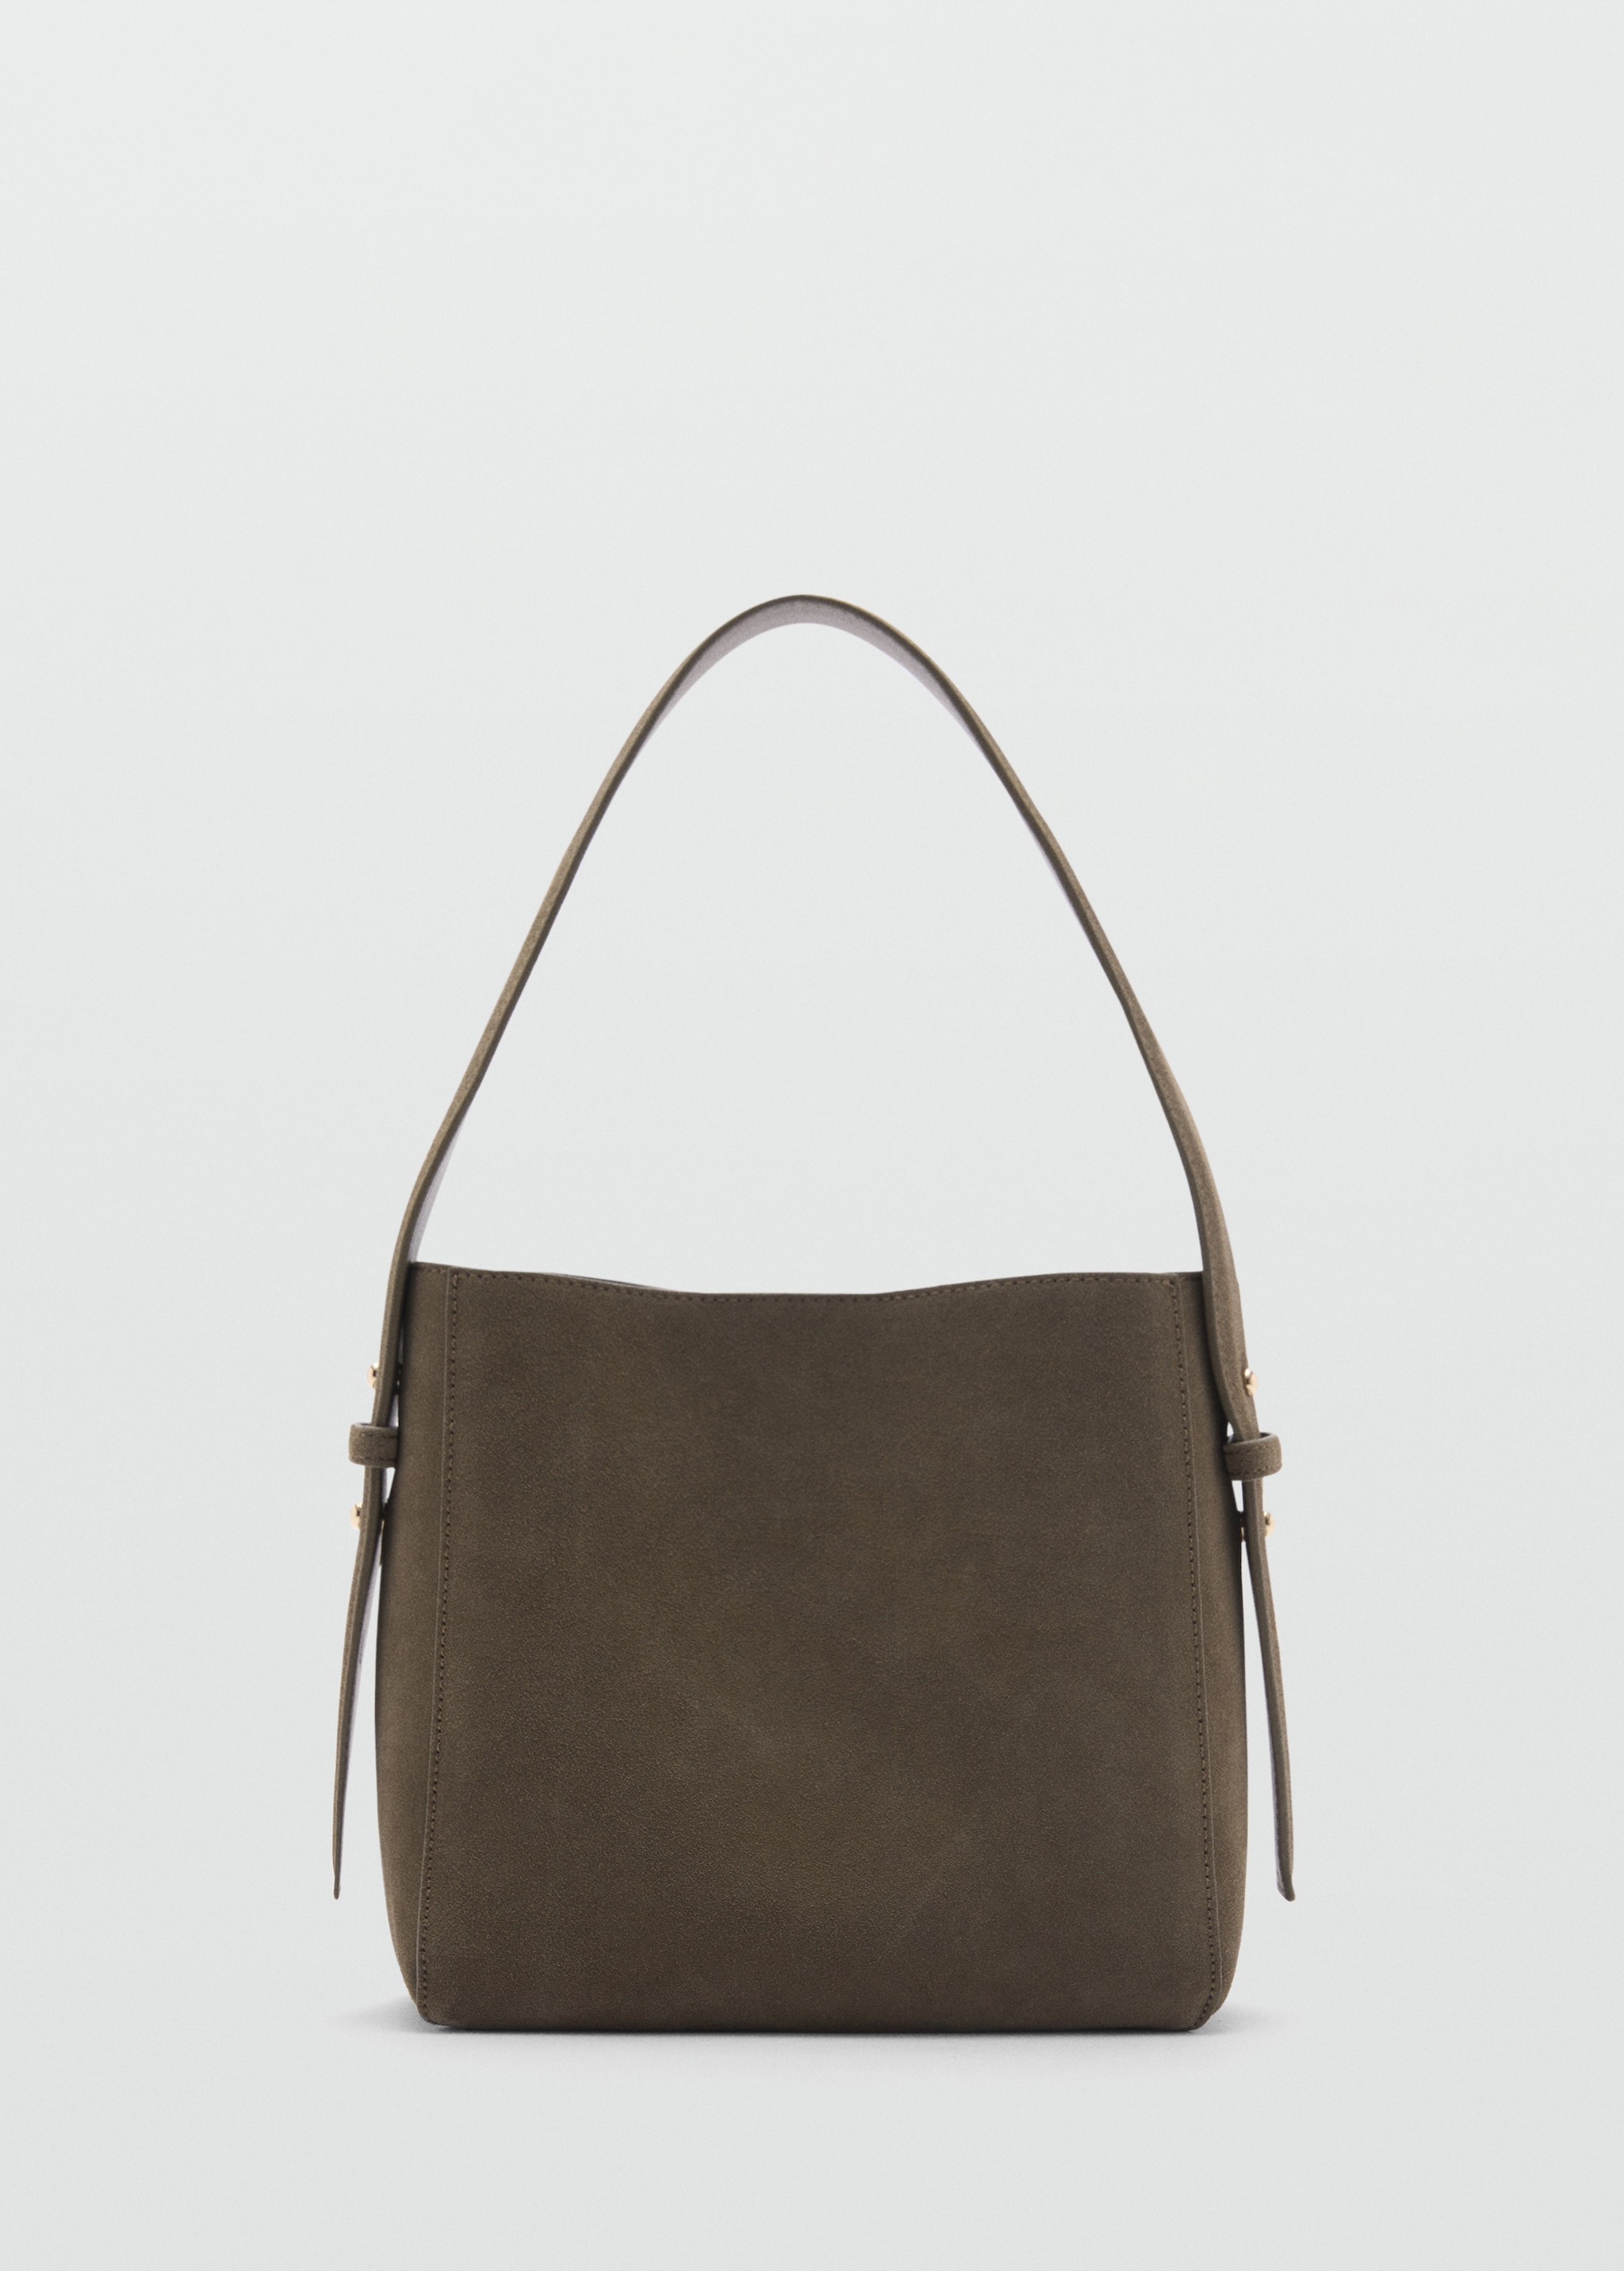 Leather shopper bag - Article without model